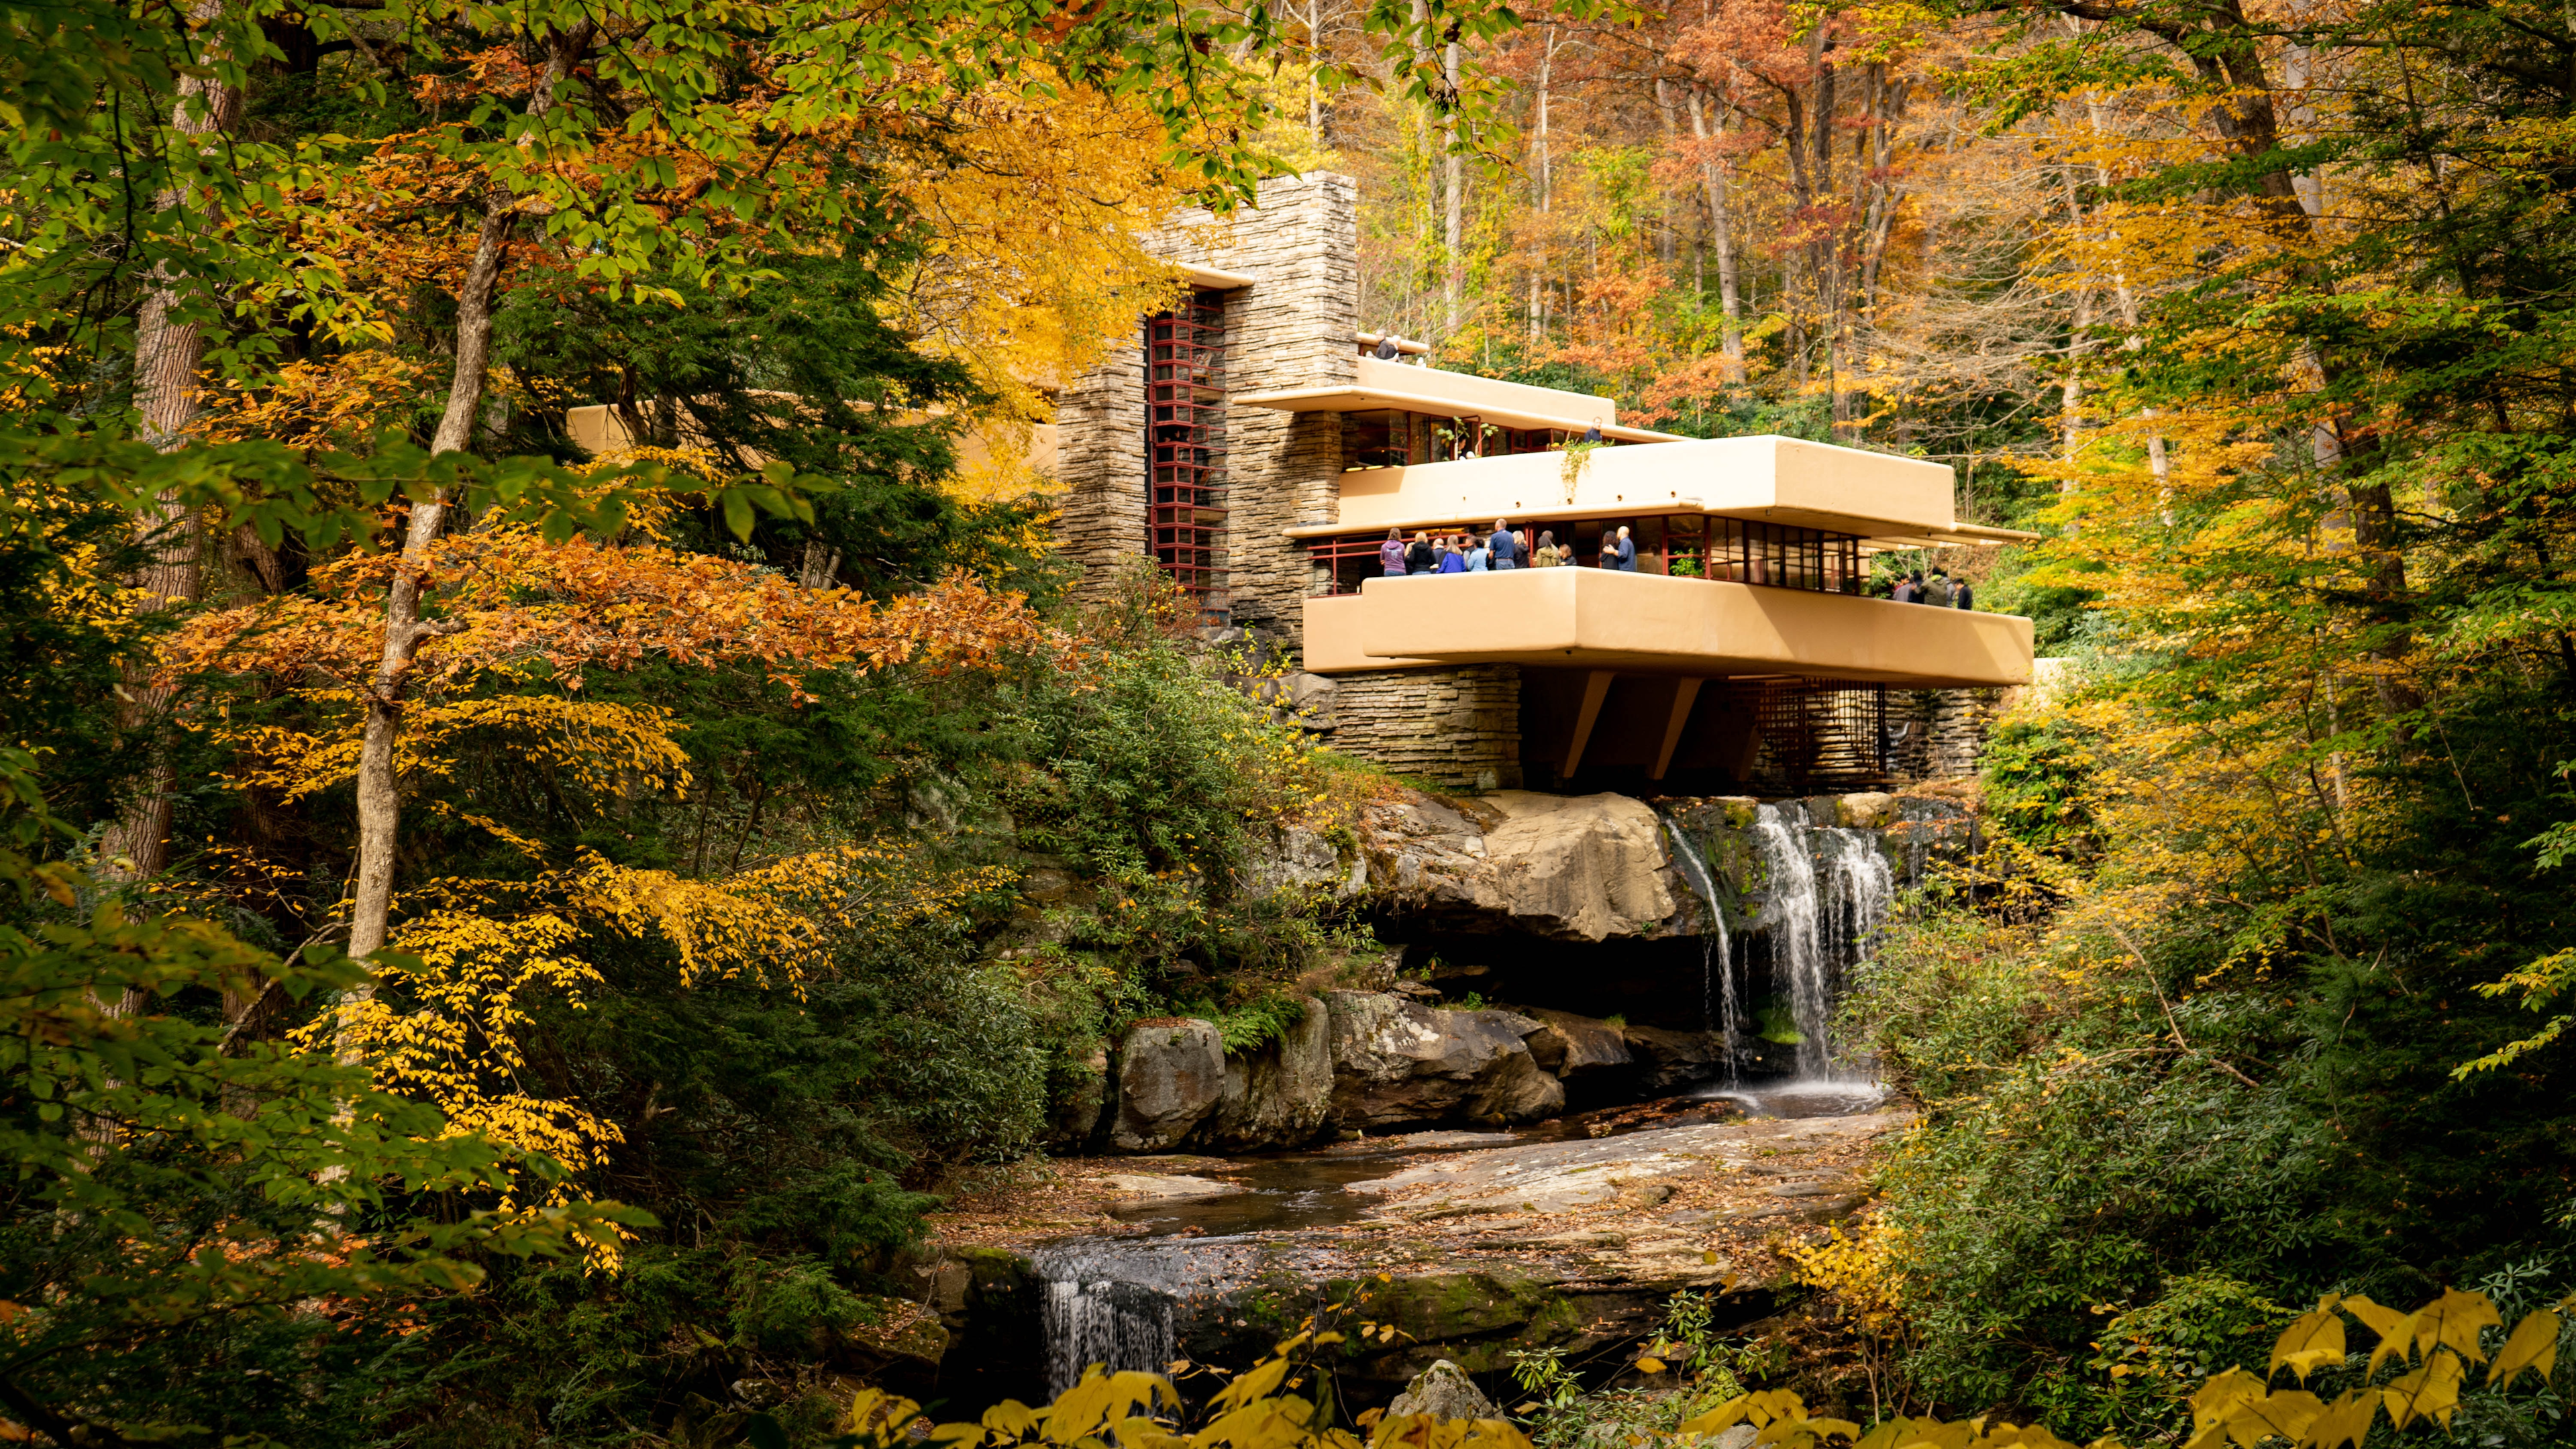 Things to do in Pennsylvania - Guided Tour at Fallingwater